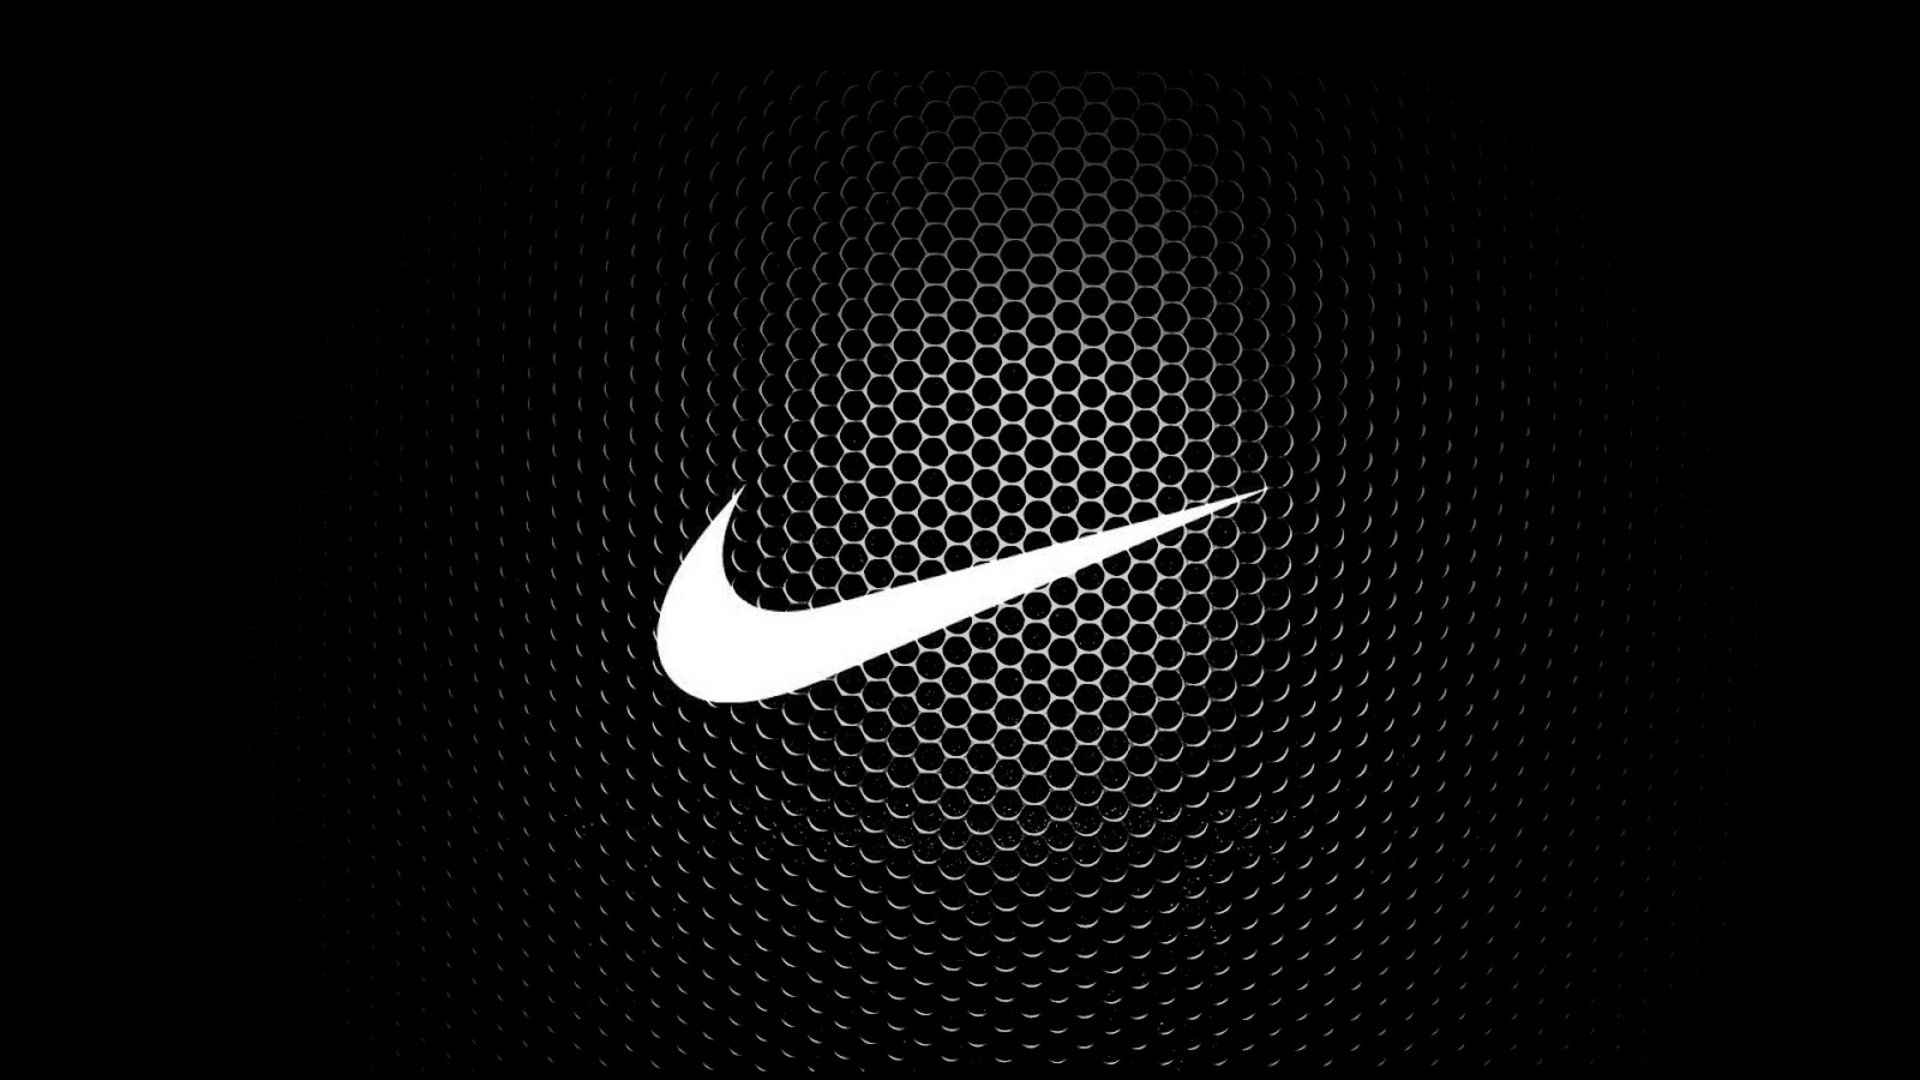 1920x1080 ... Free Download of White Nike Logo Wallpaper with Hexagonal Background